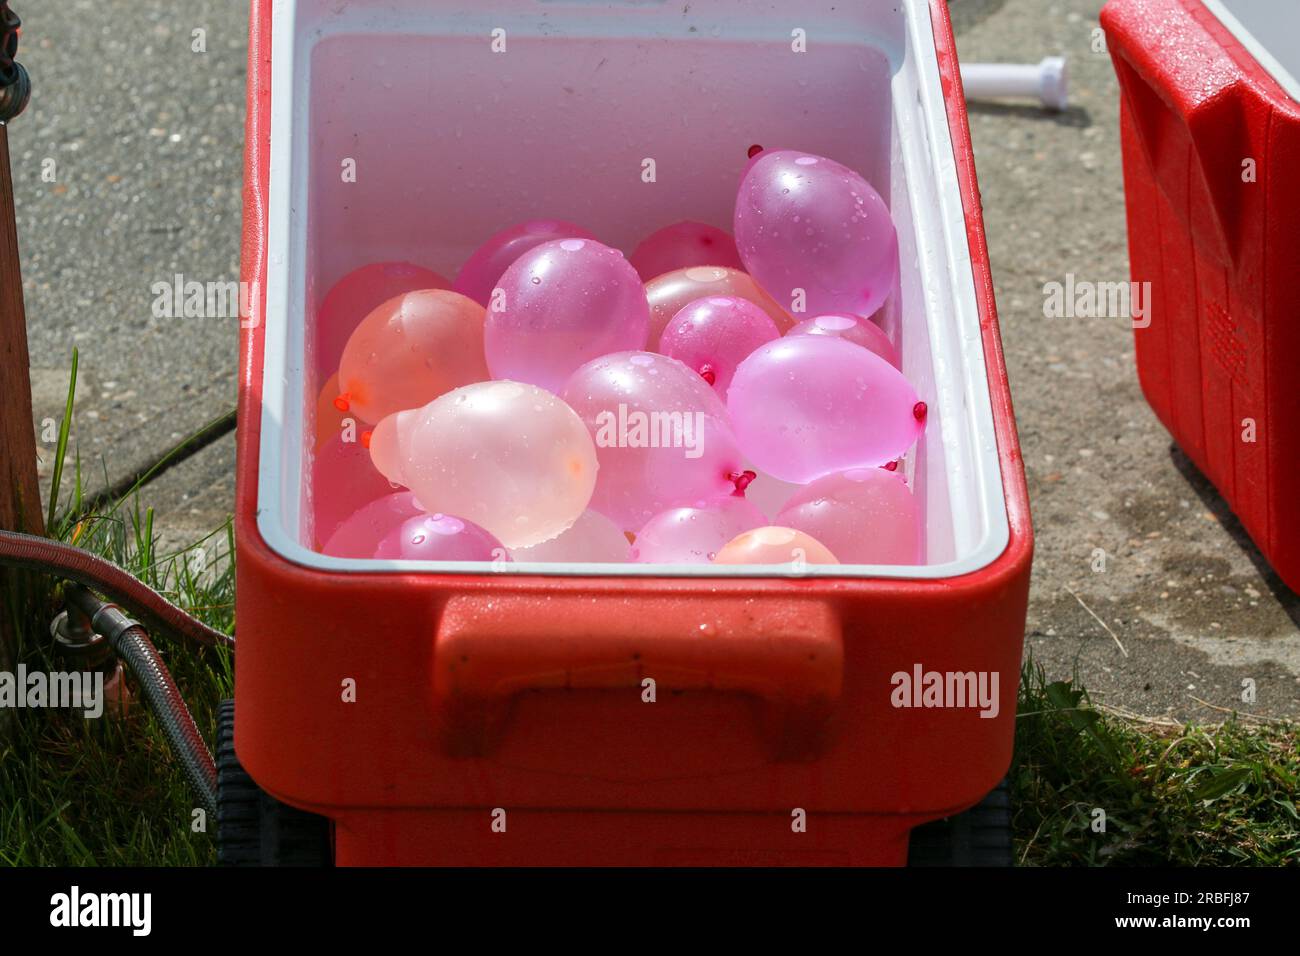 A red cooler with colorful water balloons inside. Stock Photo